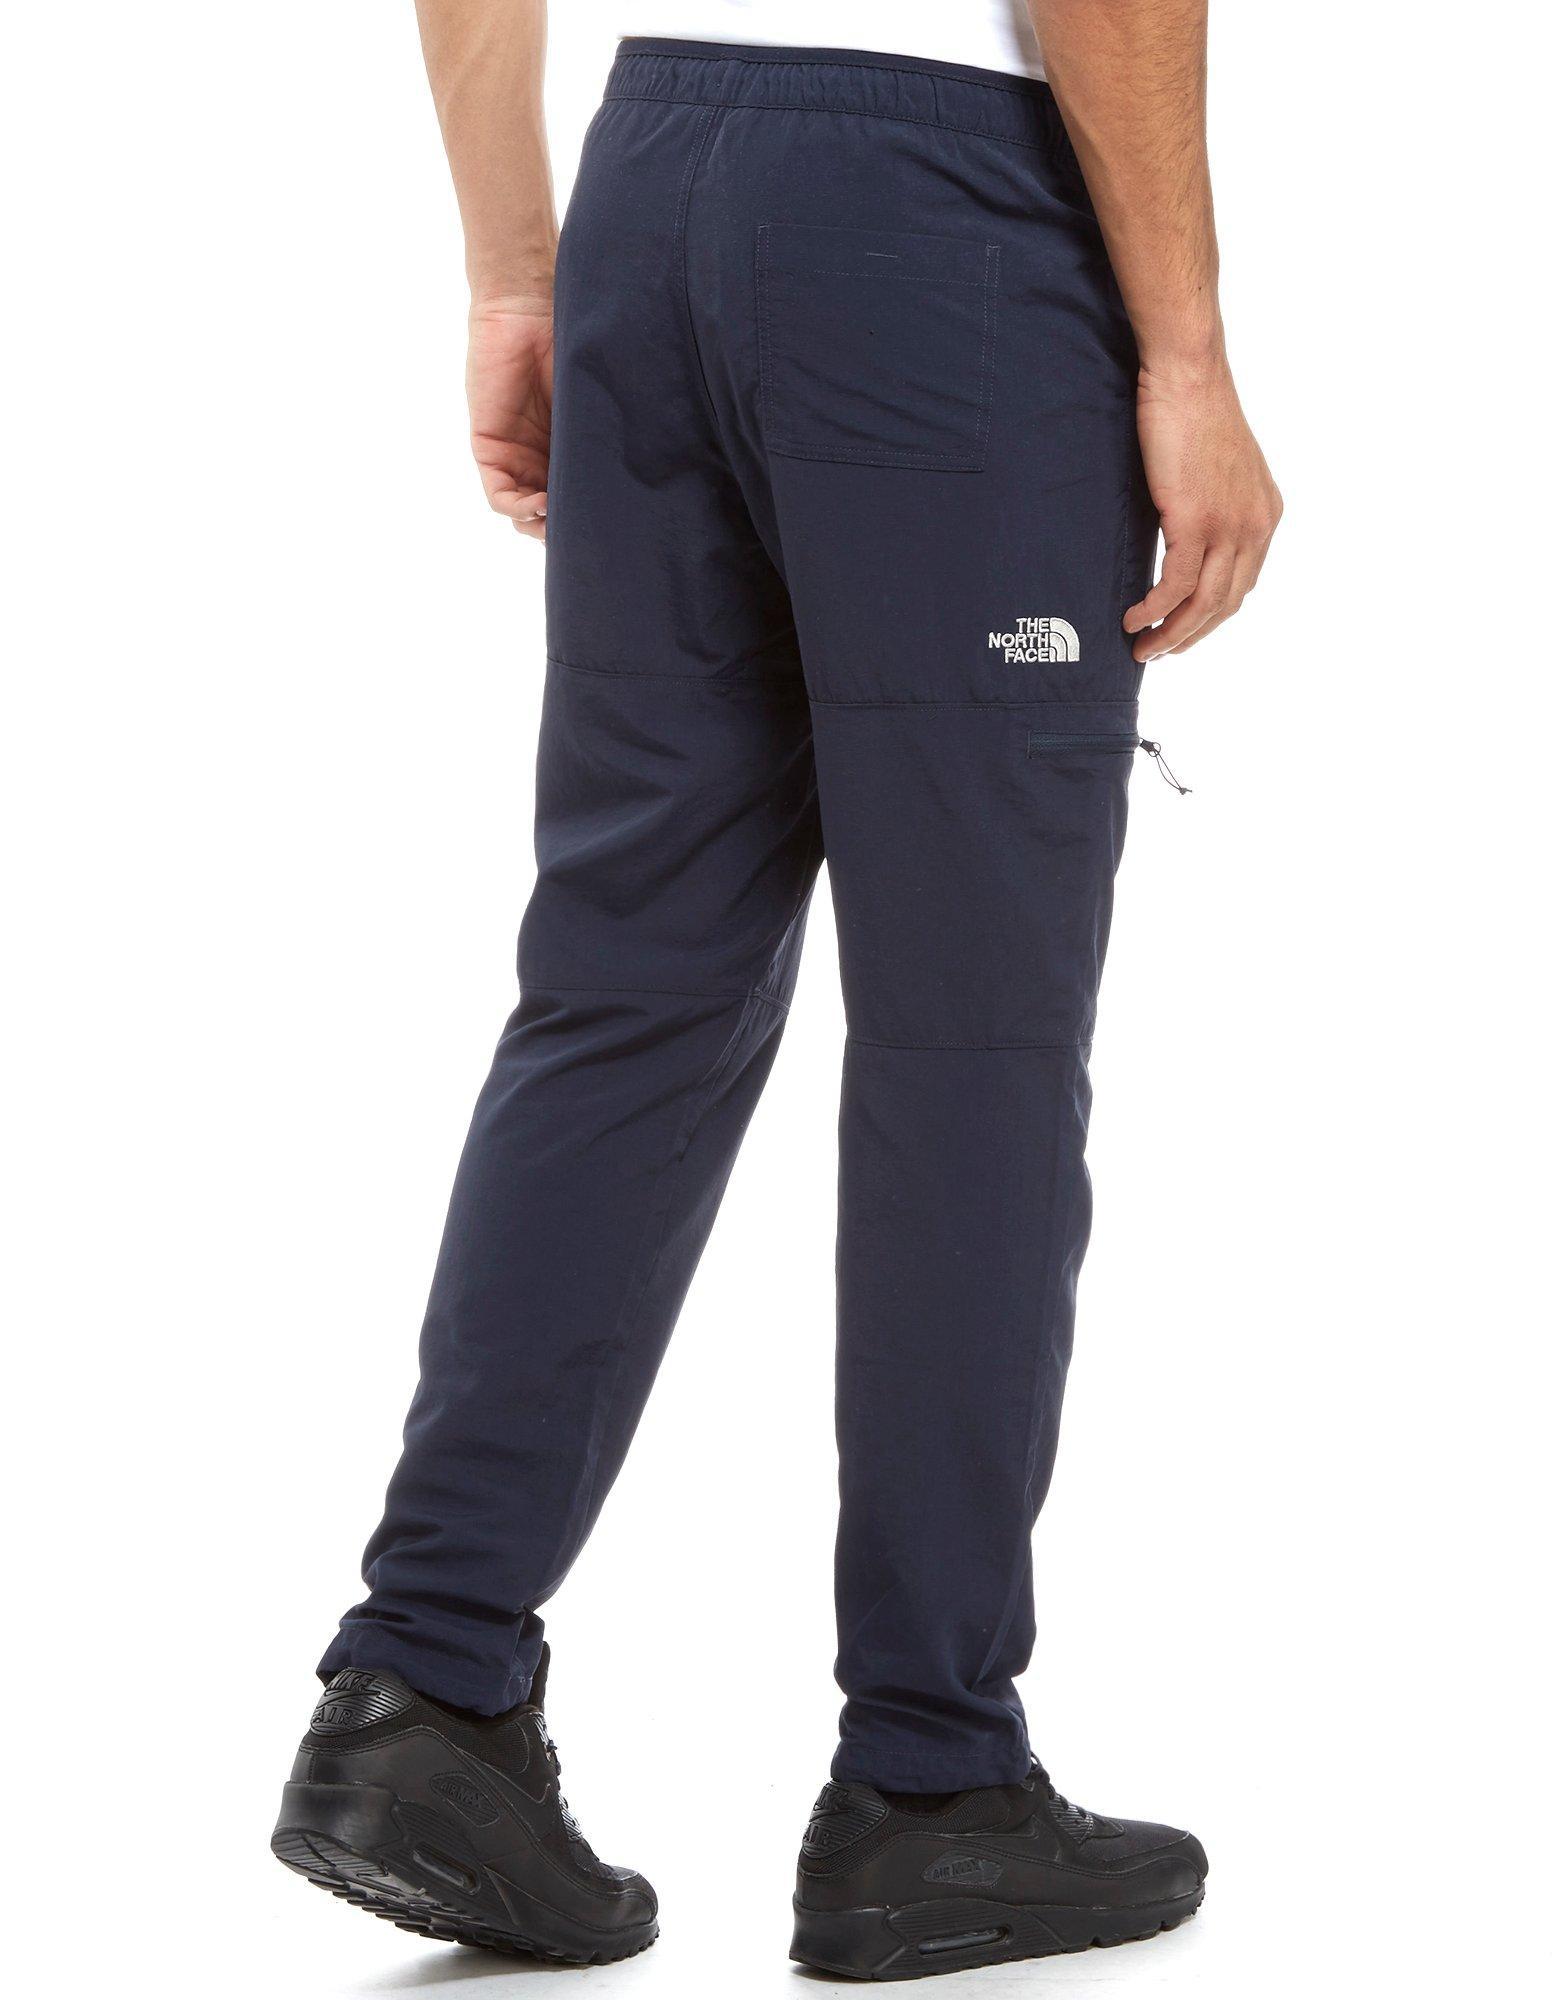 north face z pocket cargo trousers